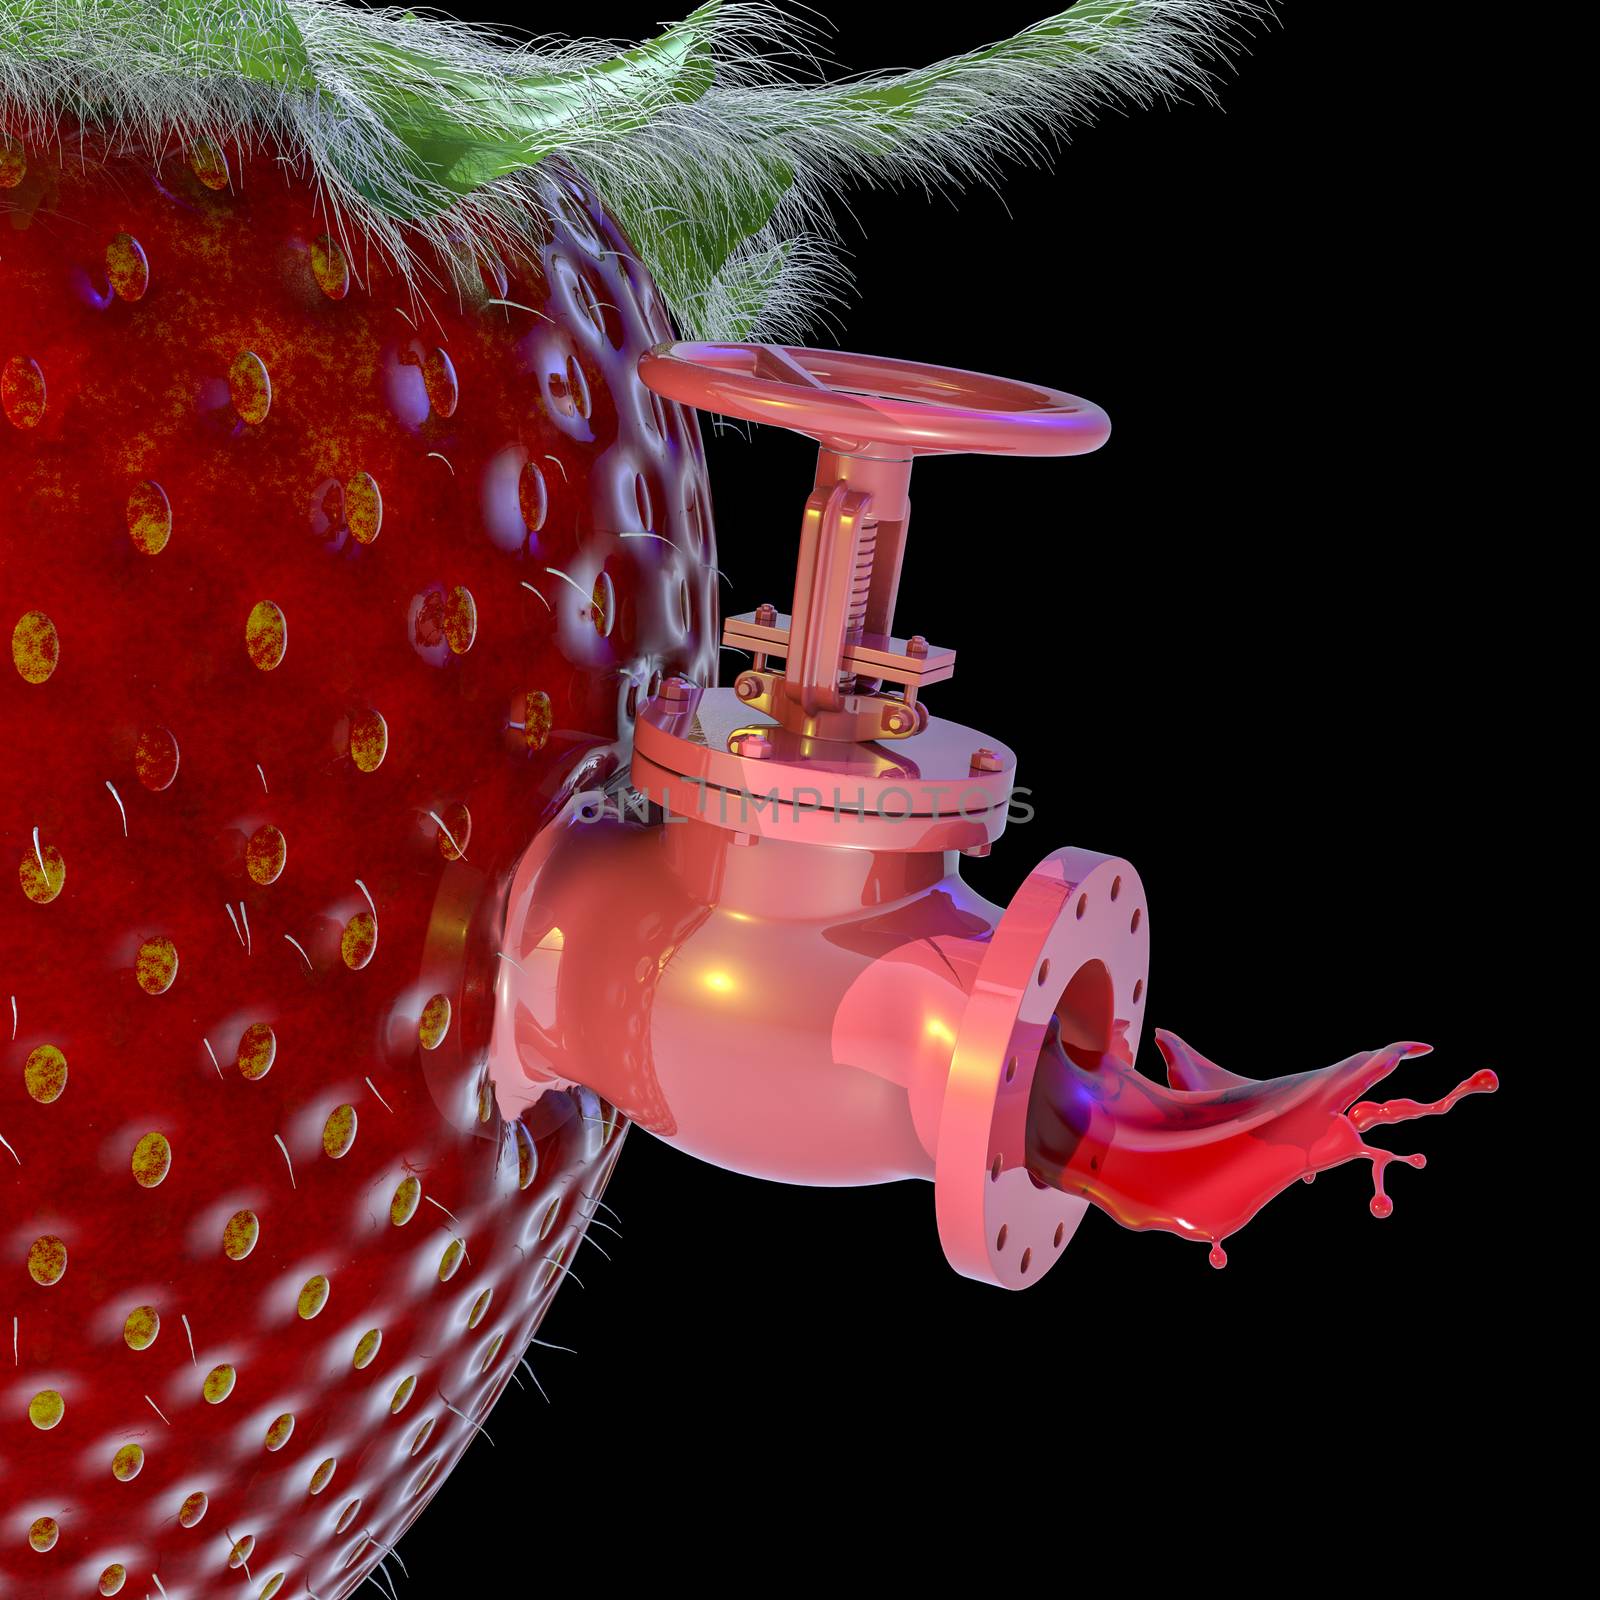 Giant strawberry with spigot valve pipe with juice splash out.